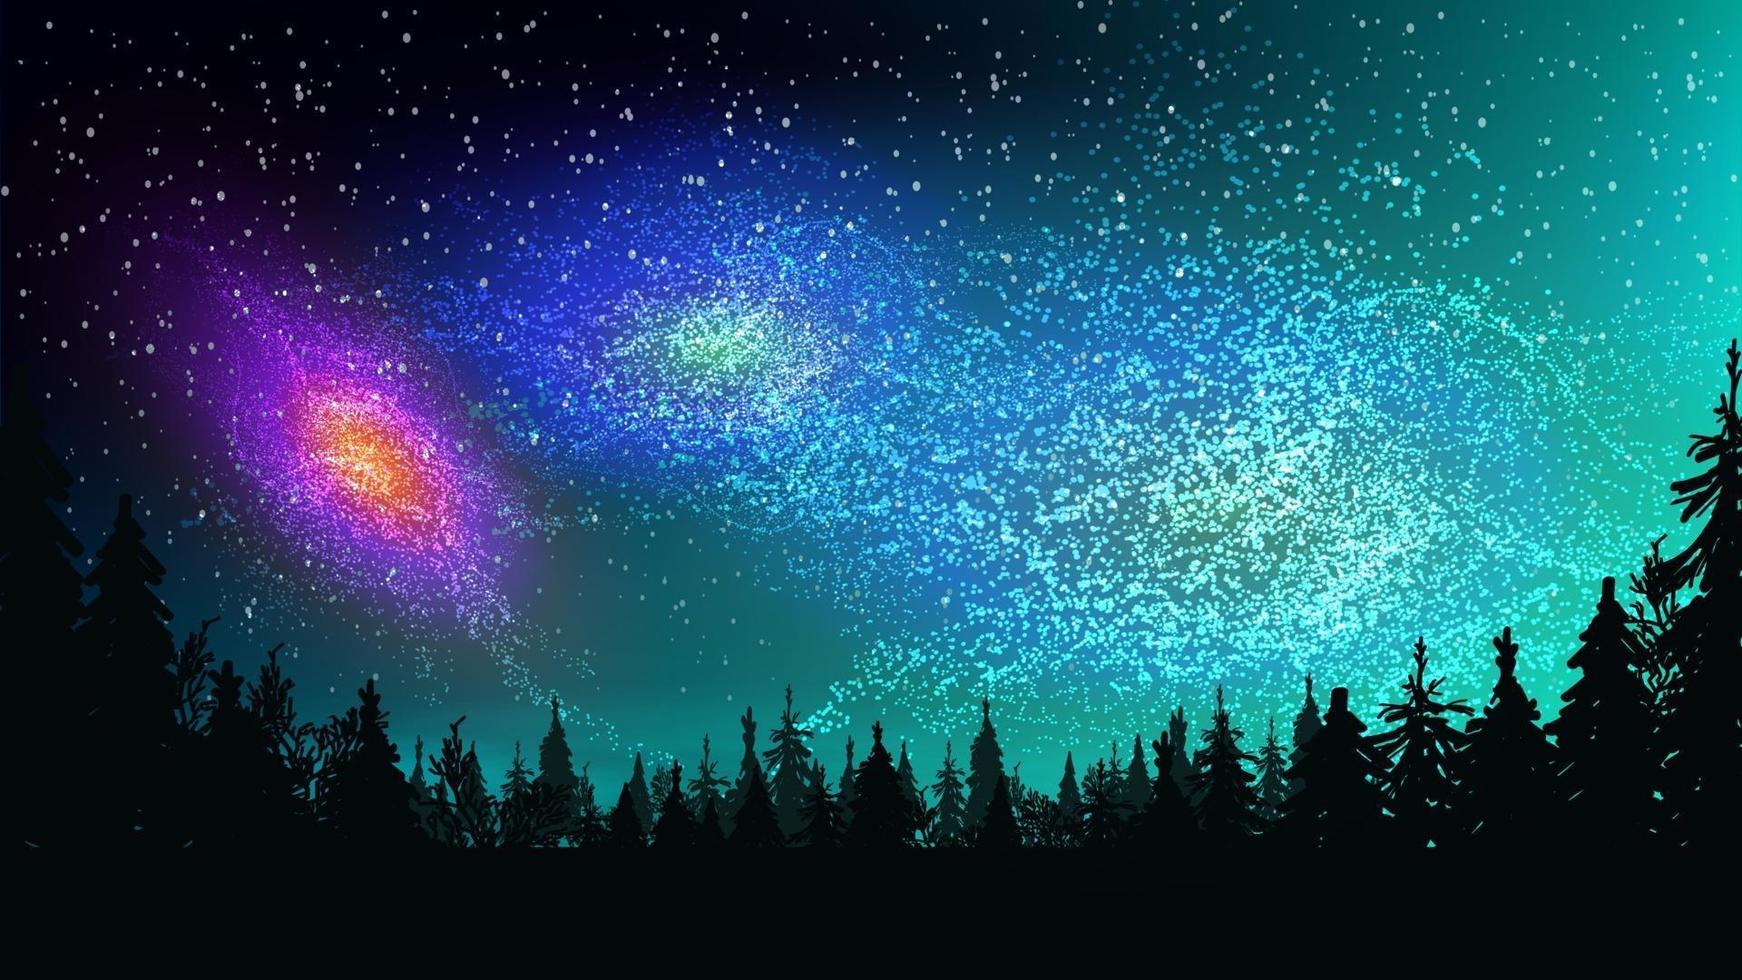 Bright constellations, galaxies in the dark starry sky above the pine forest vector